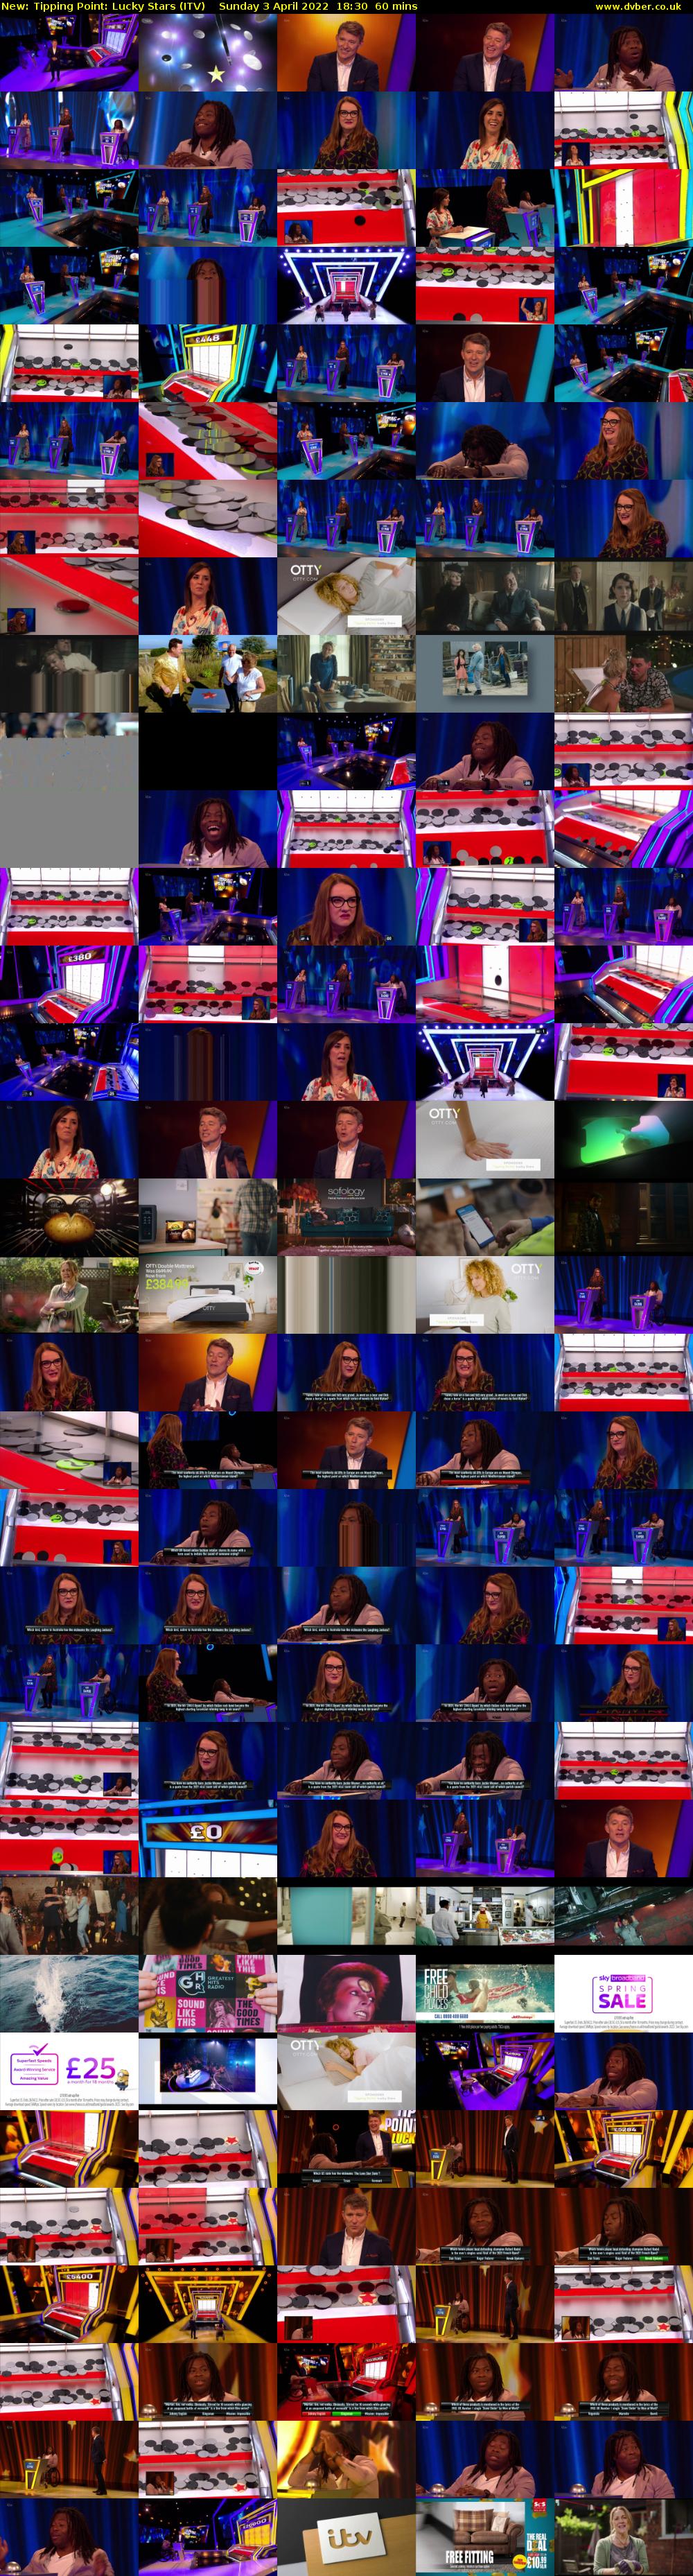 Tipping Point: Lucky Stars (ITV) Sunday 3 April 2022 18:30 - 19:30